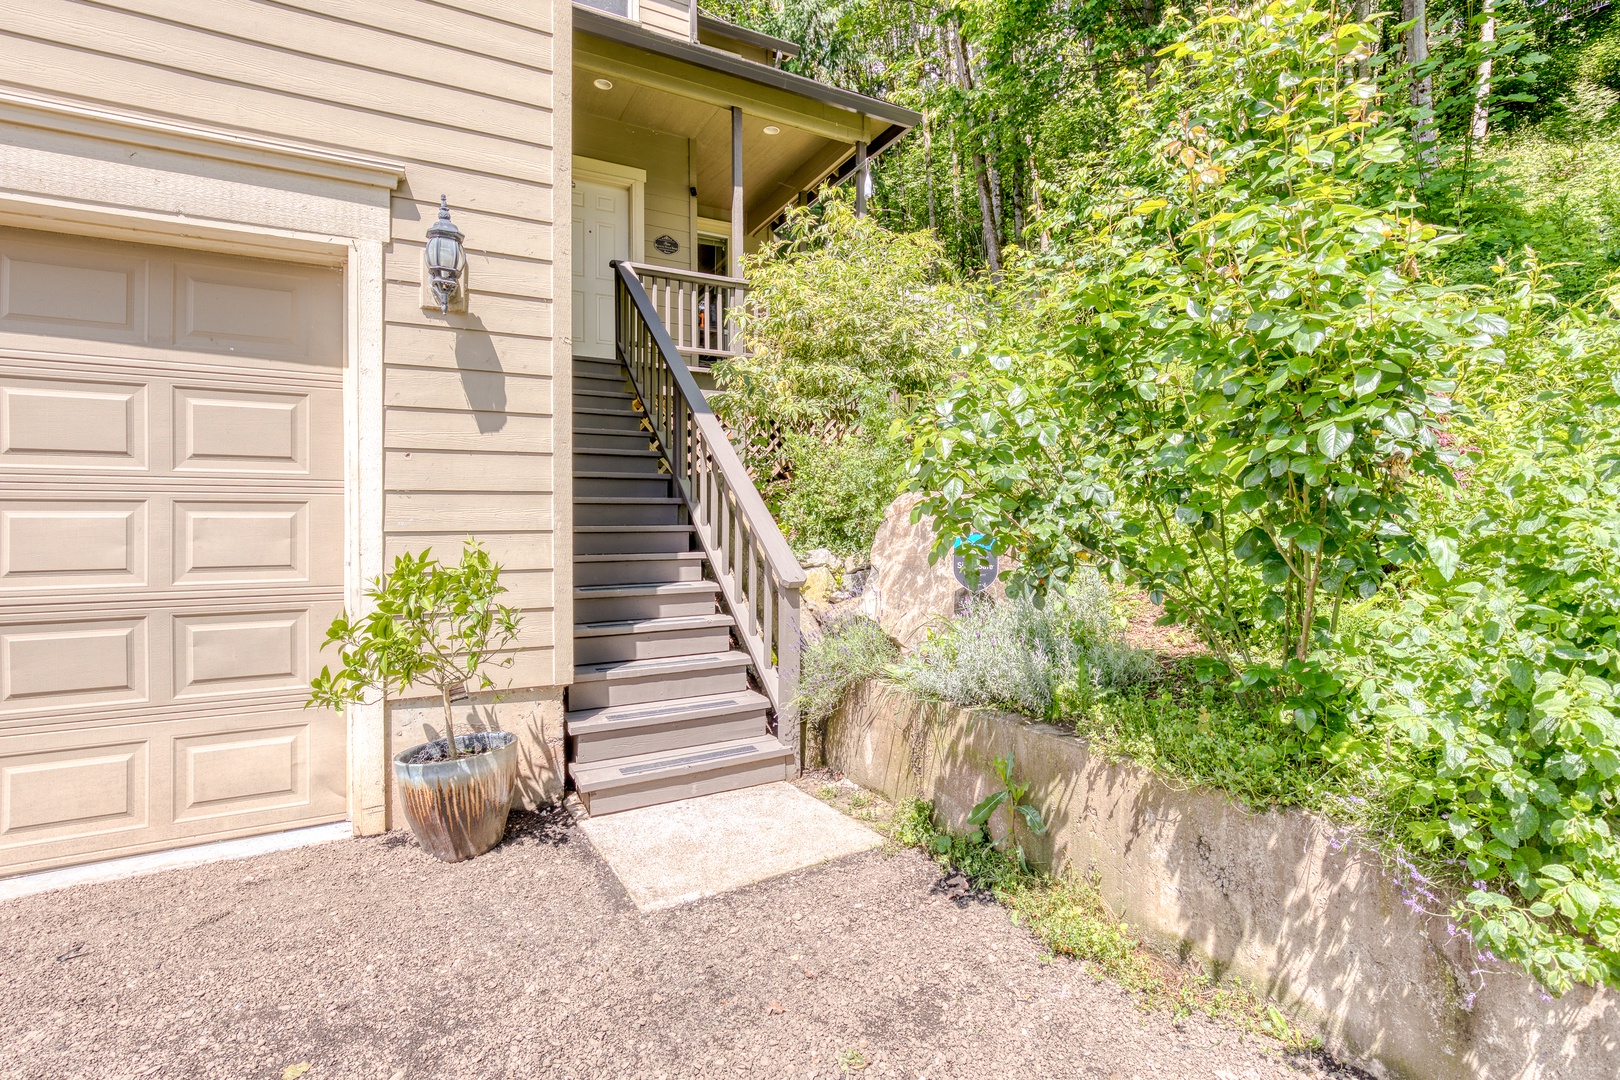 Clackamas Vacation Rentals, Duck Crossing - Stairs leading up to the front porch and home entrance